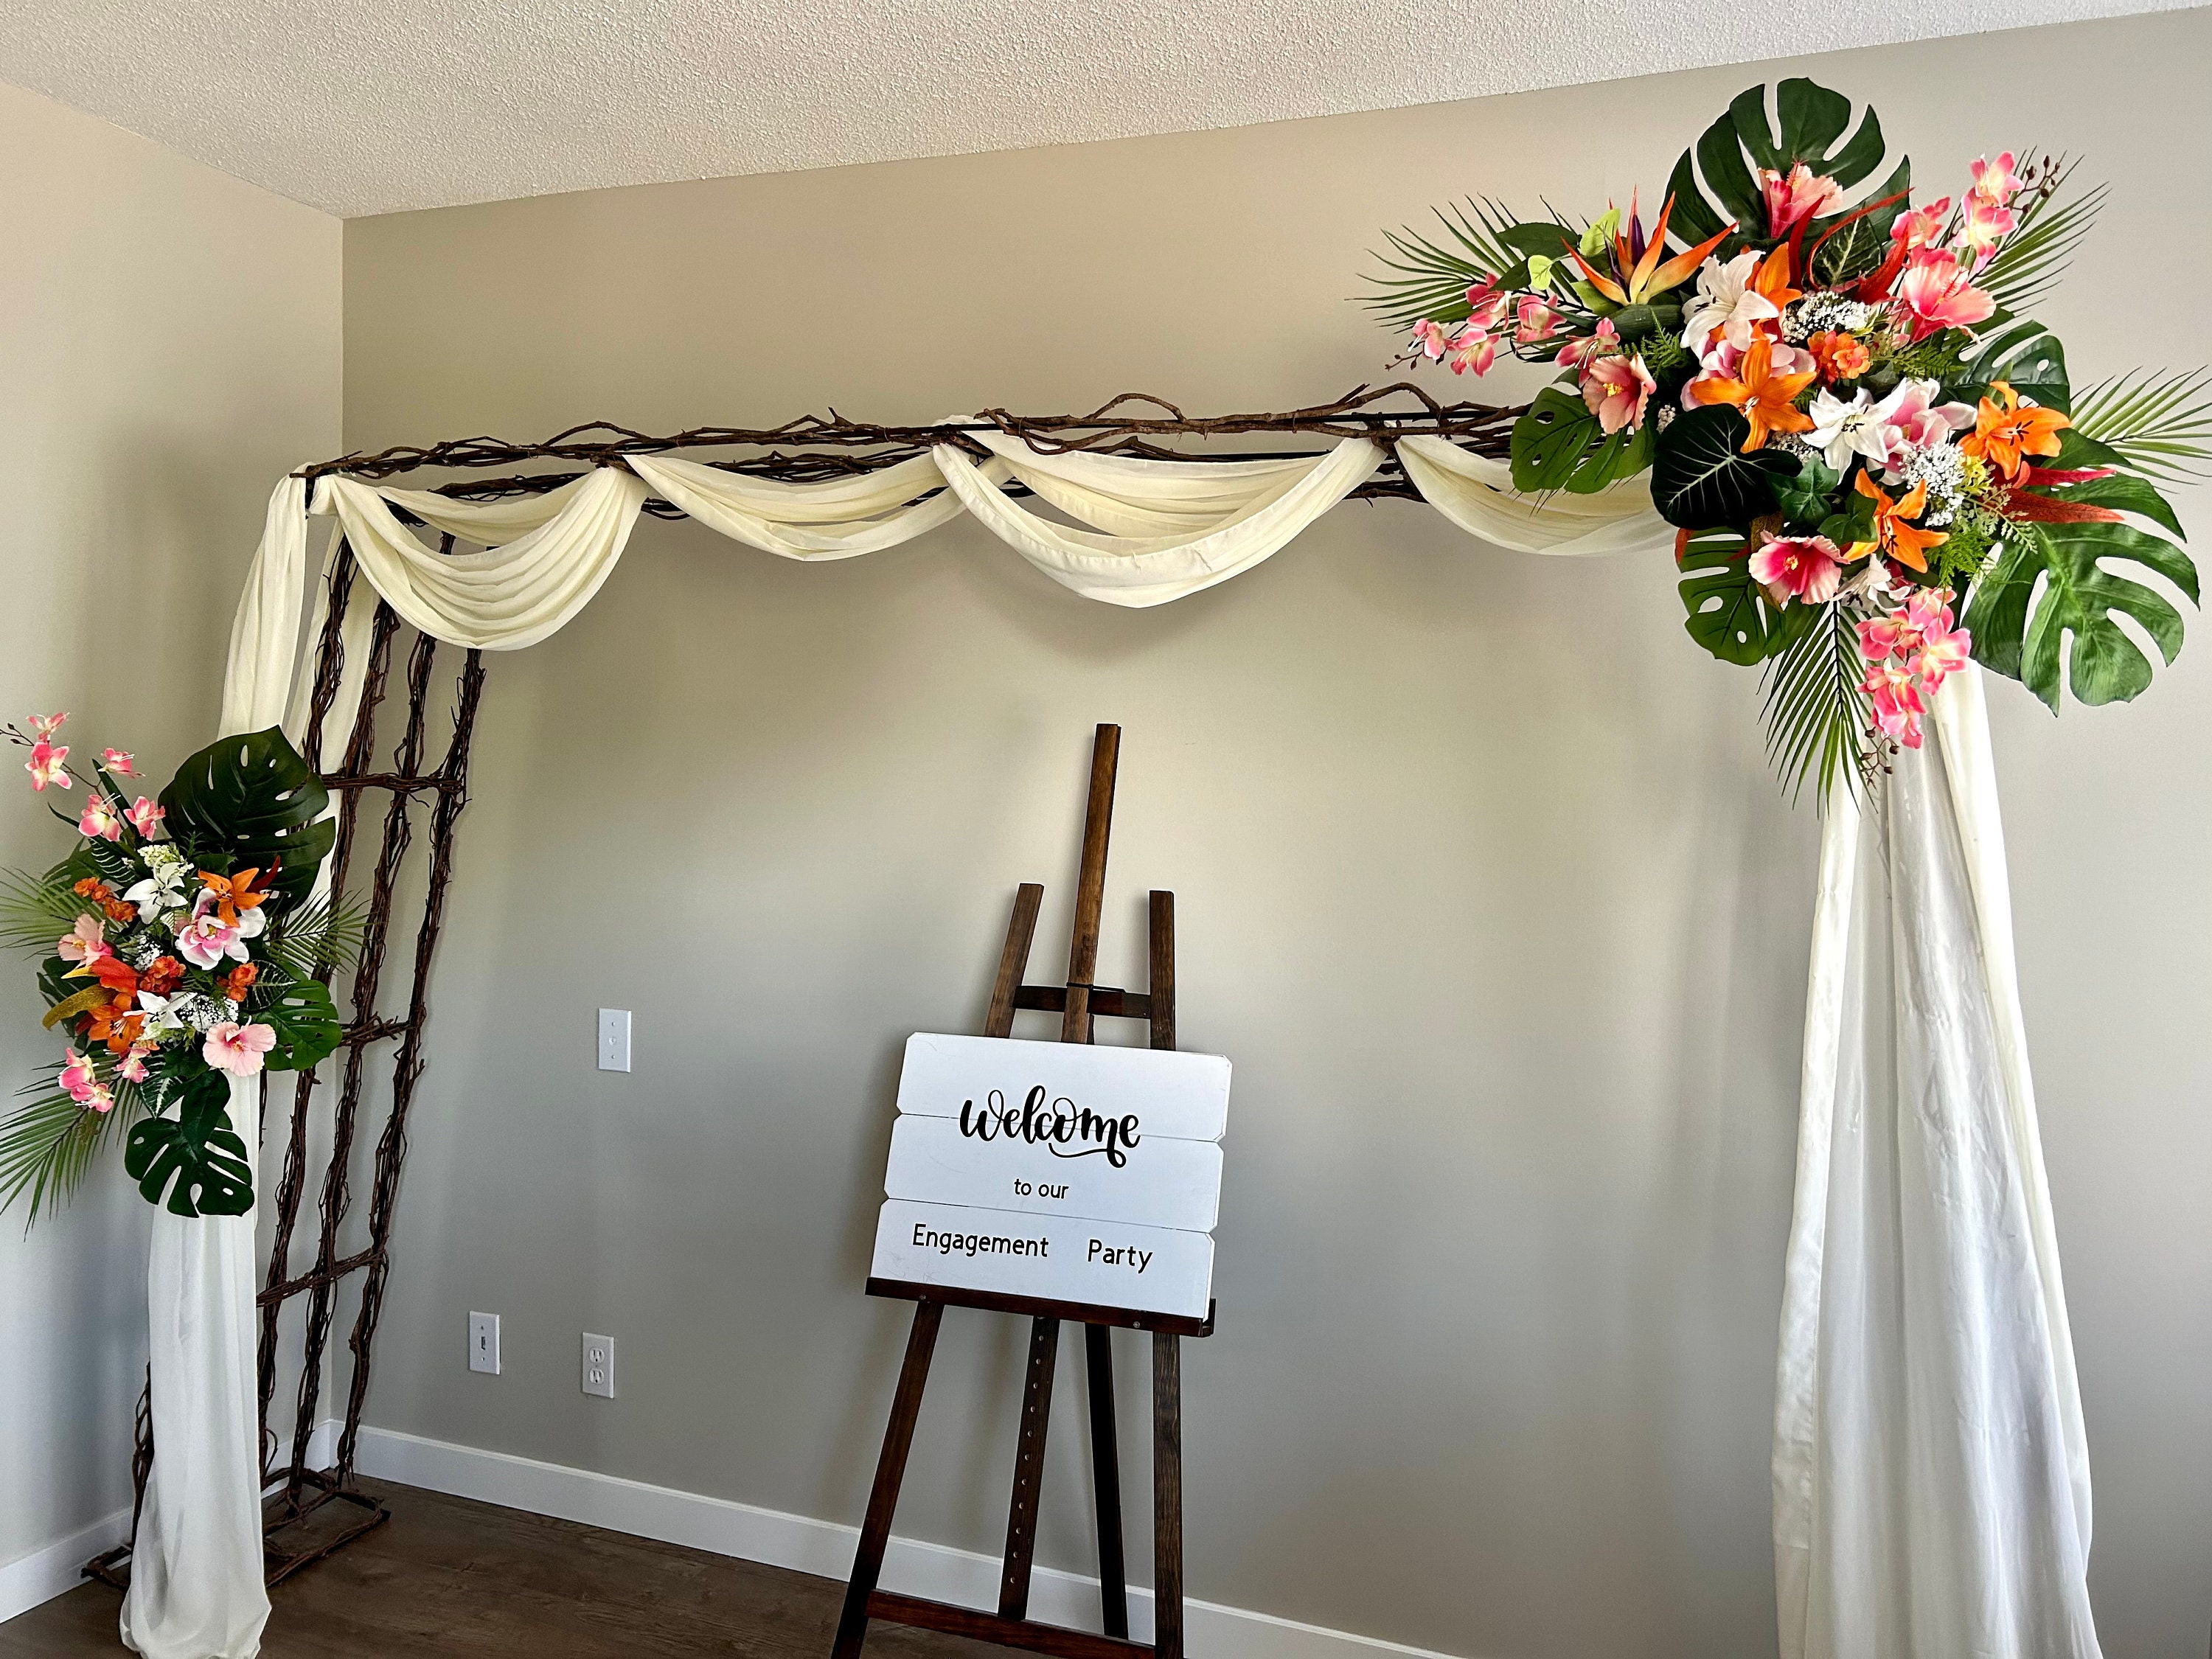 Tropical Wedding Arch Flowers/corner Swag &tieback Made With 